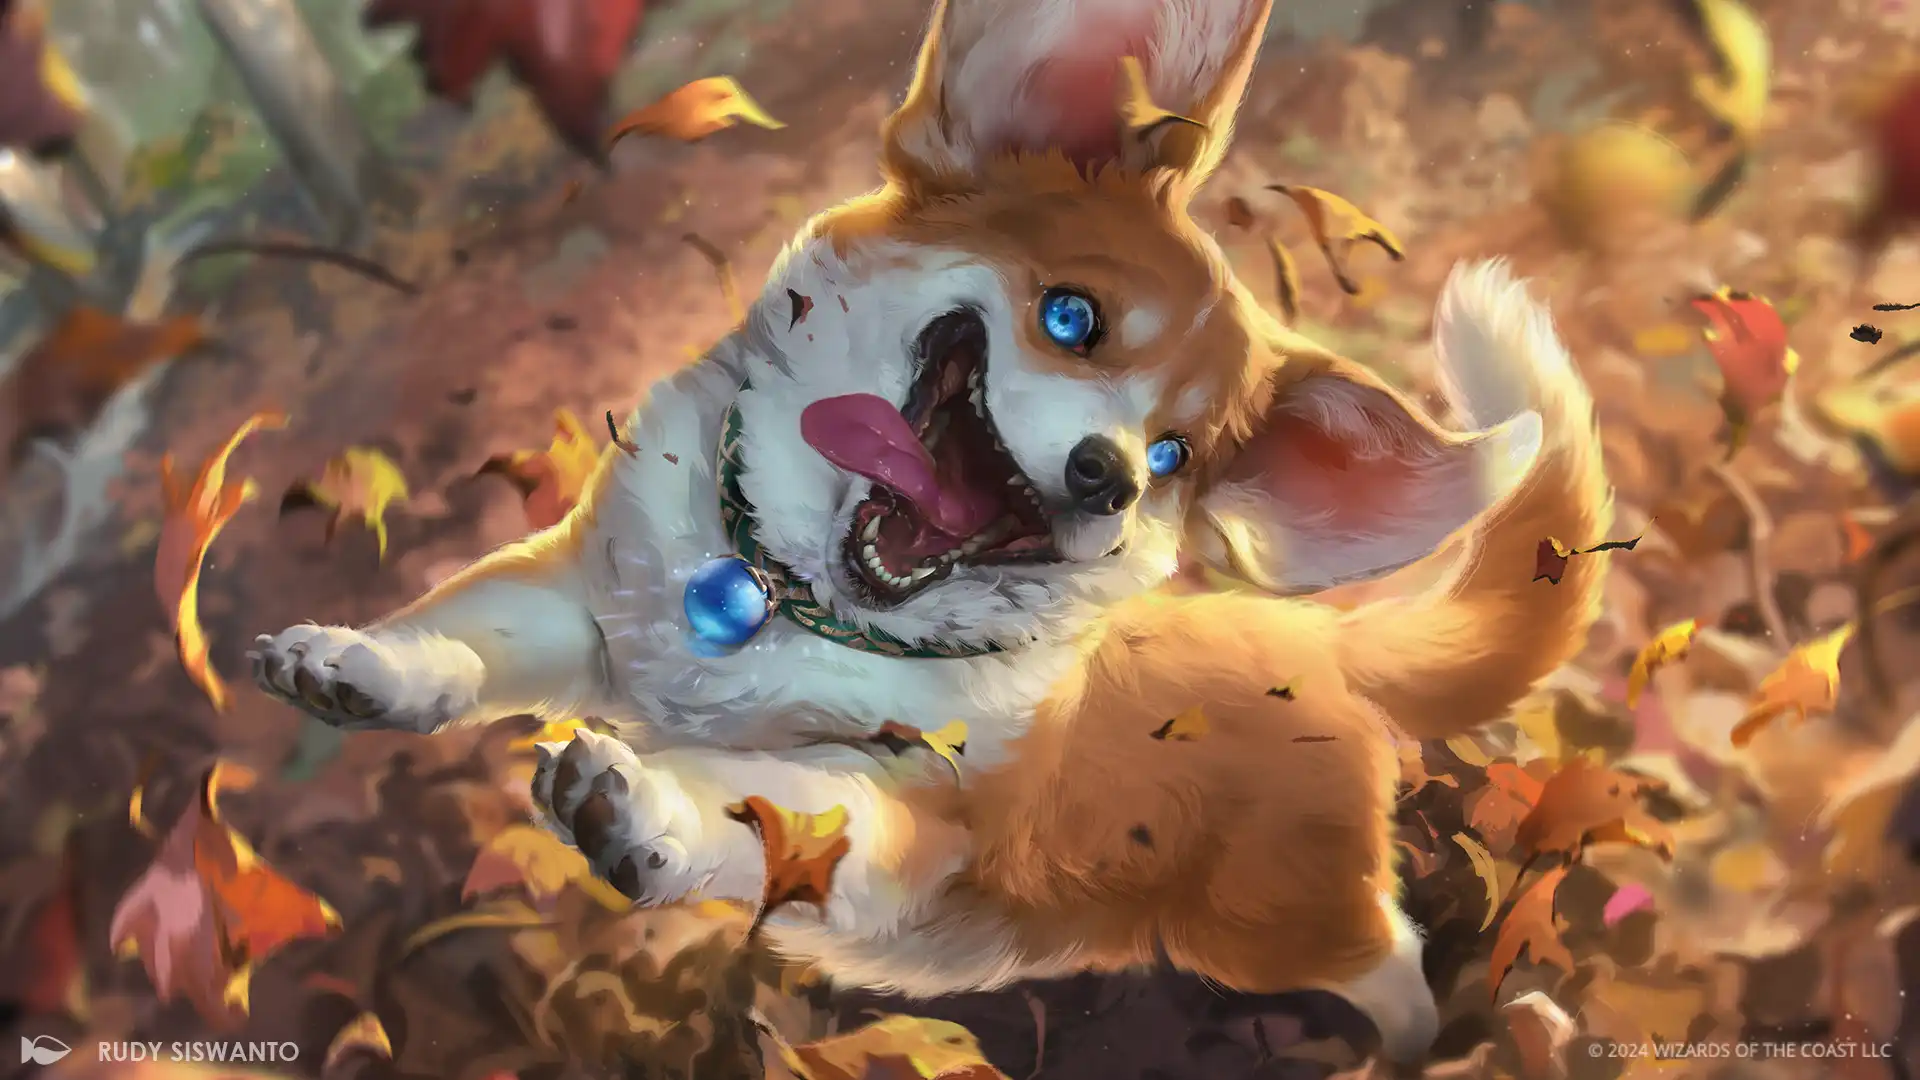 Card art of Phelia, Exuberant Shepherd, showing a corgi jumping exuberantly at the viewer among autumn leaves, blue eyes wild and giddy, tongue lolling out joyously